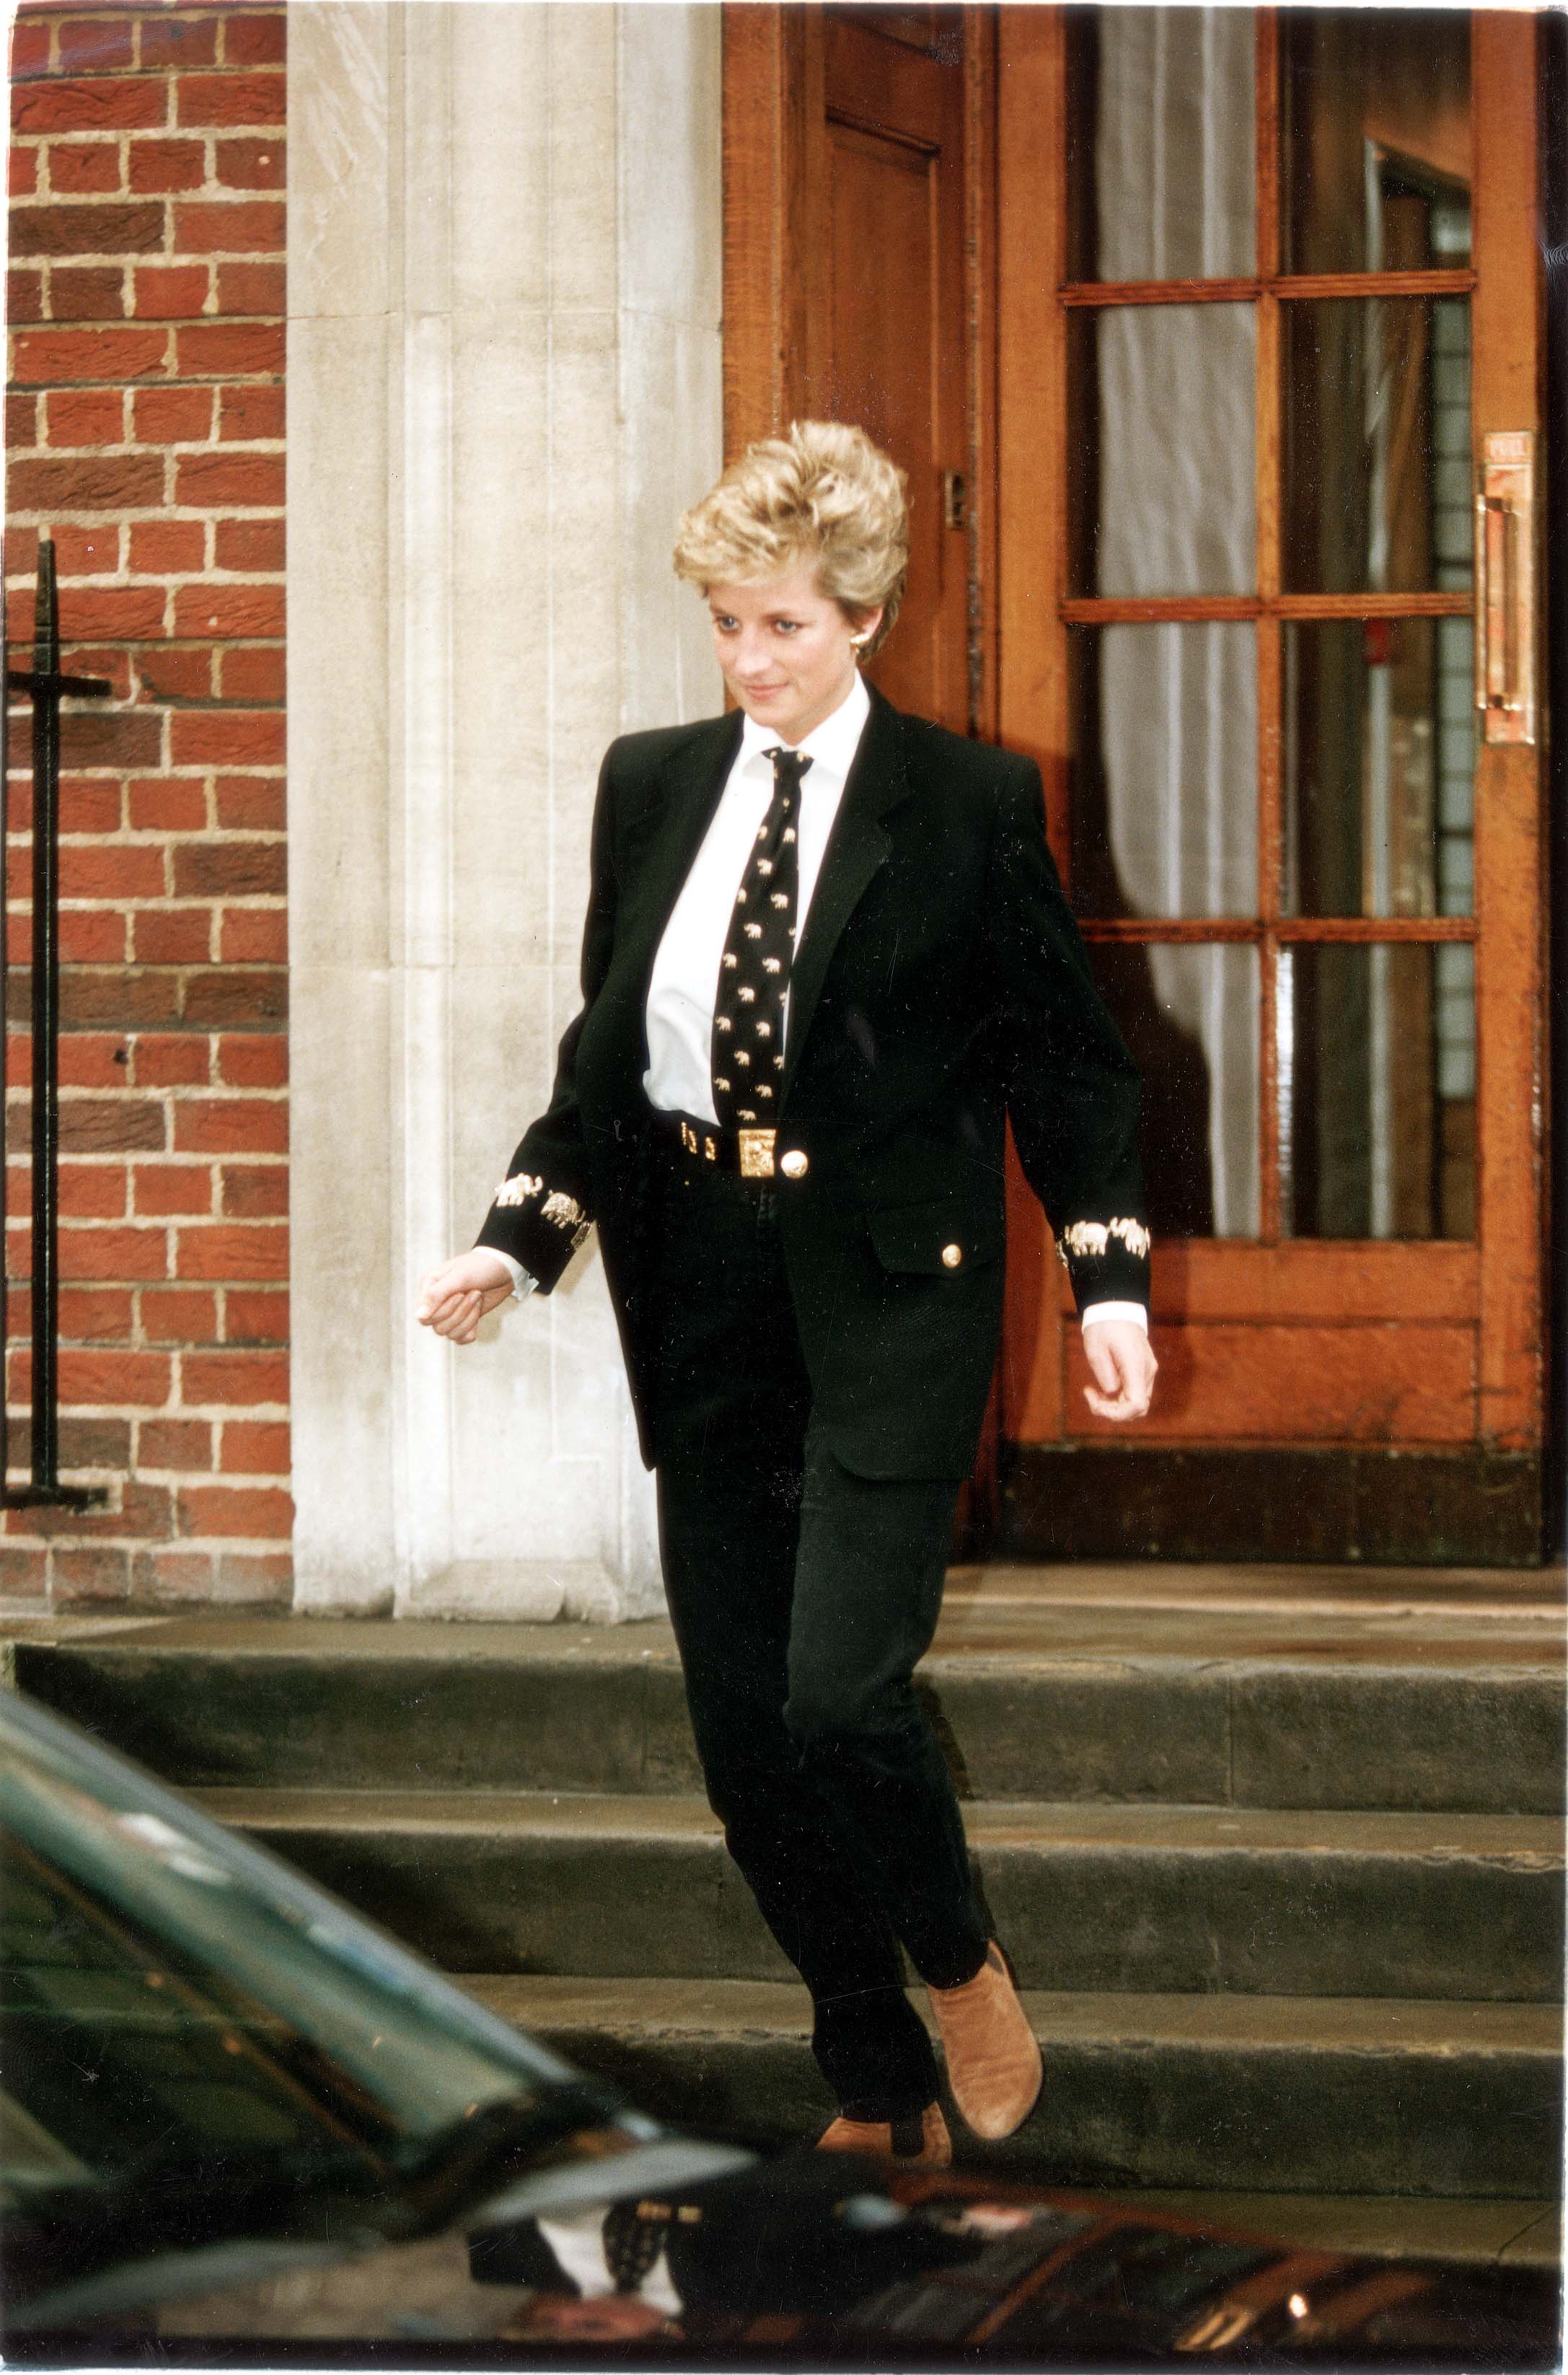 Diana became more experimental with her fashion looks in the 1990s, as this androgynous ensemble illustrates. This black suit comprised an oversized blazer with elephant embellishments on the sleeve. Diana wore also chose a gold statement belt with a large buckle and a tie with elephants on it, to match the sleeves.